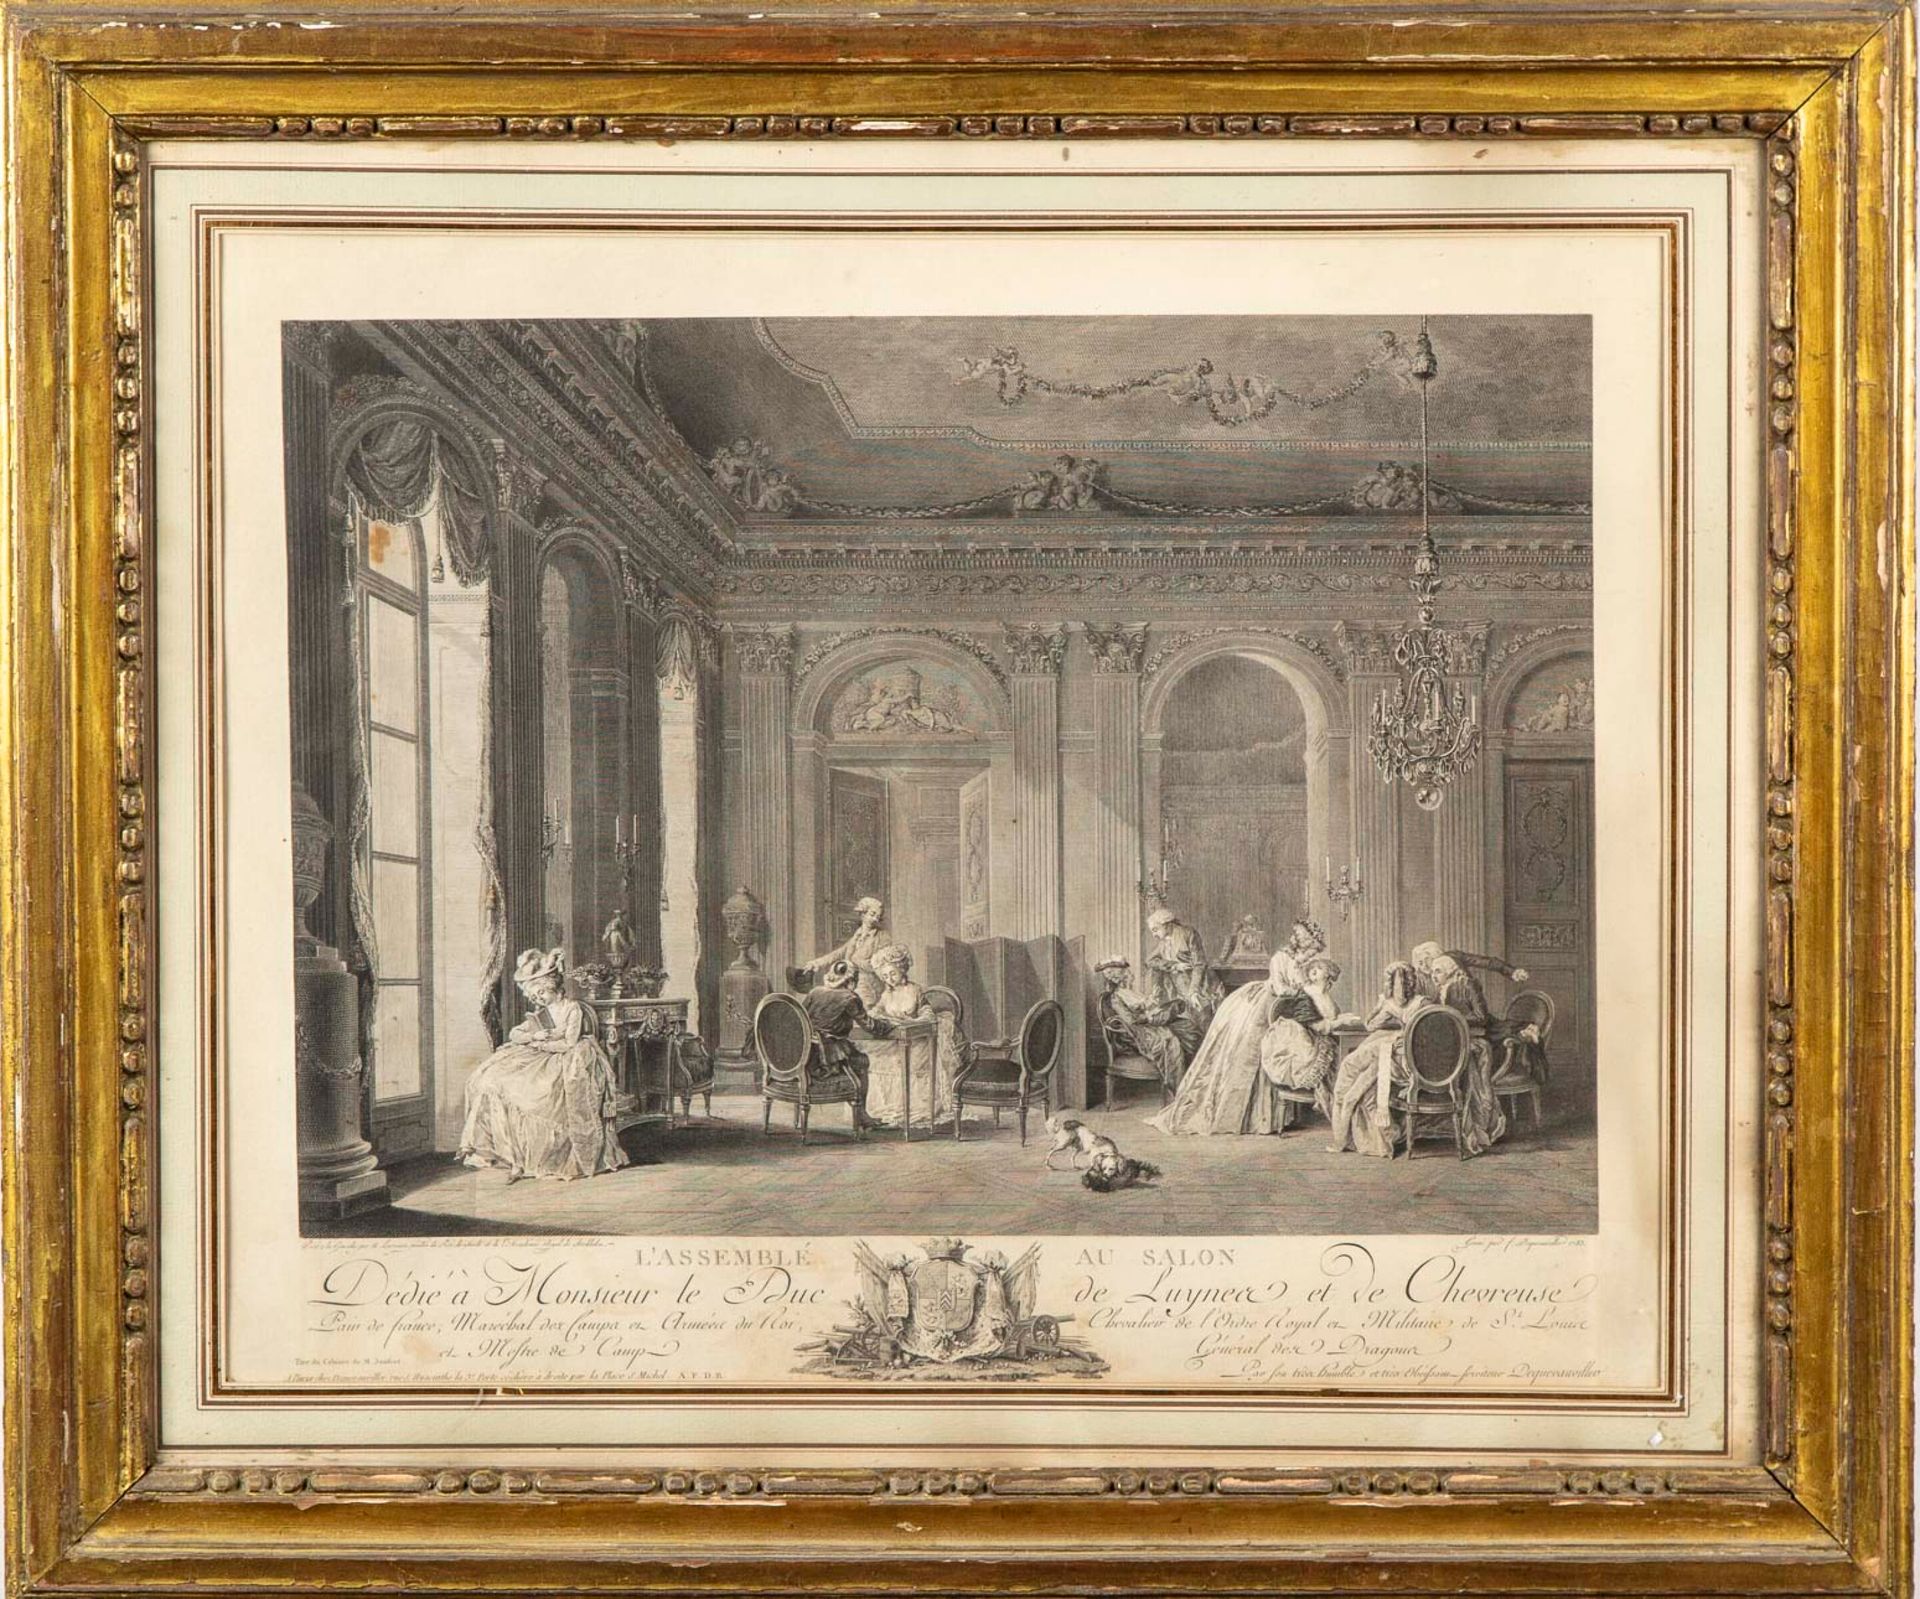 LAVREINCE After Lavreince, engraved by François Dequevauviller (1745-1817)

The &hellip;